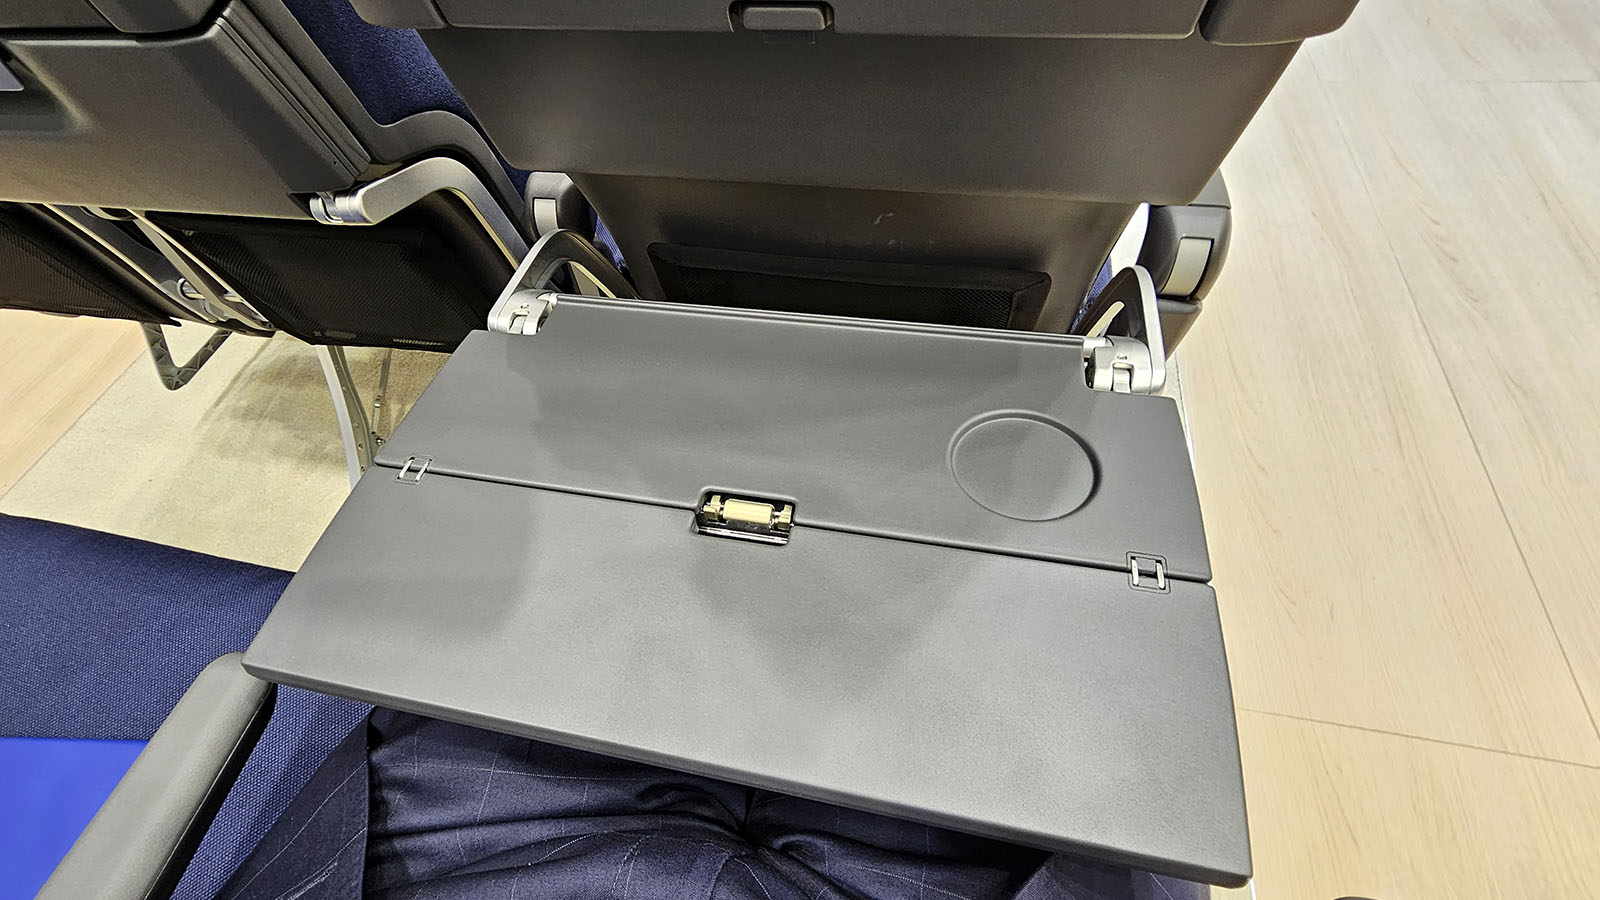 Standard tray table in Qantas' Project Sunrise Economy seat